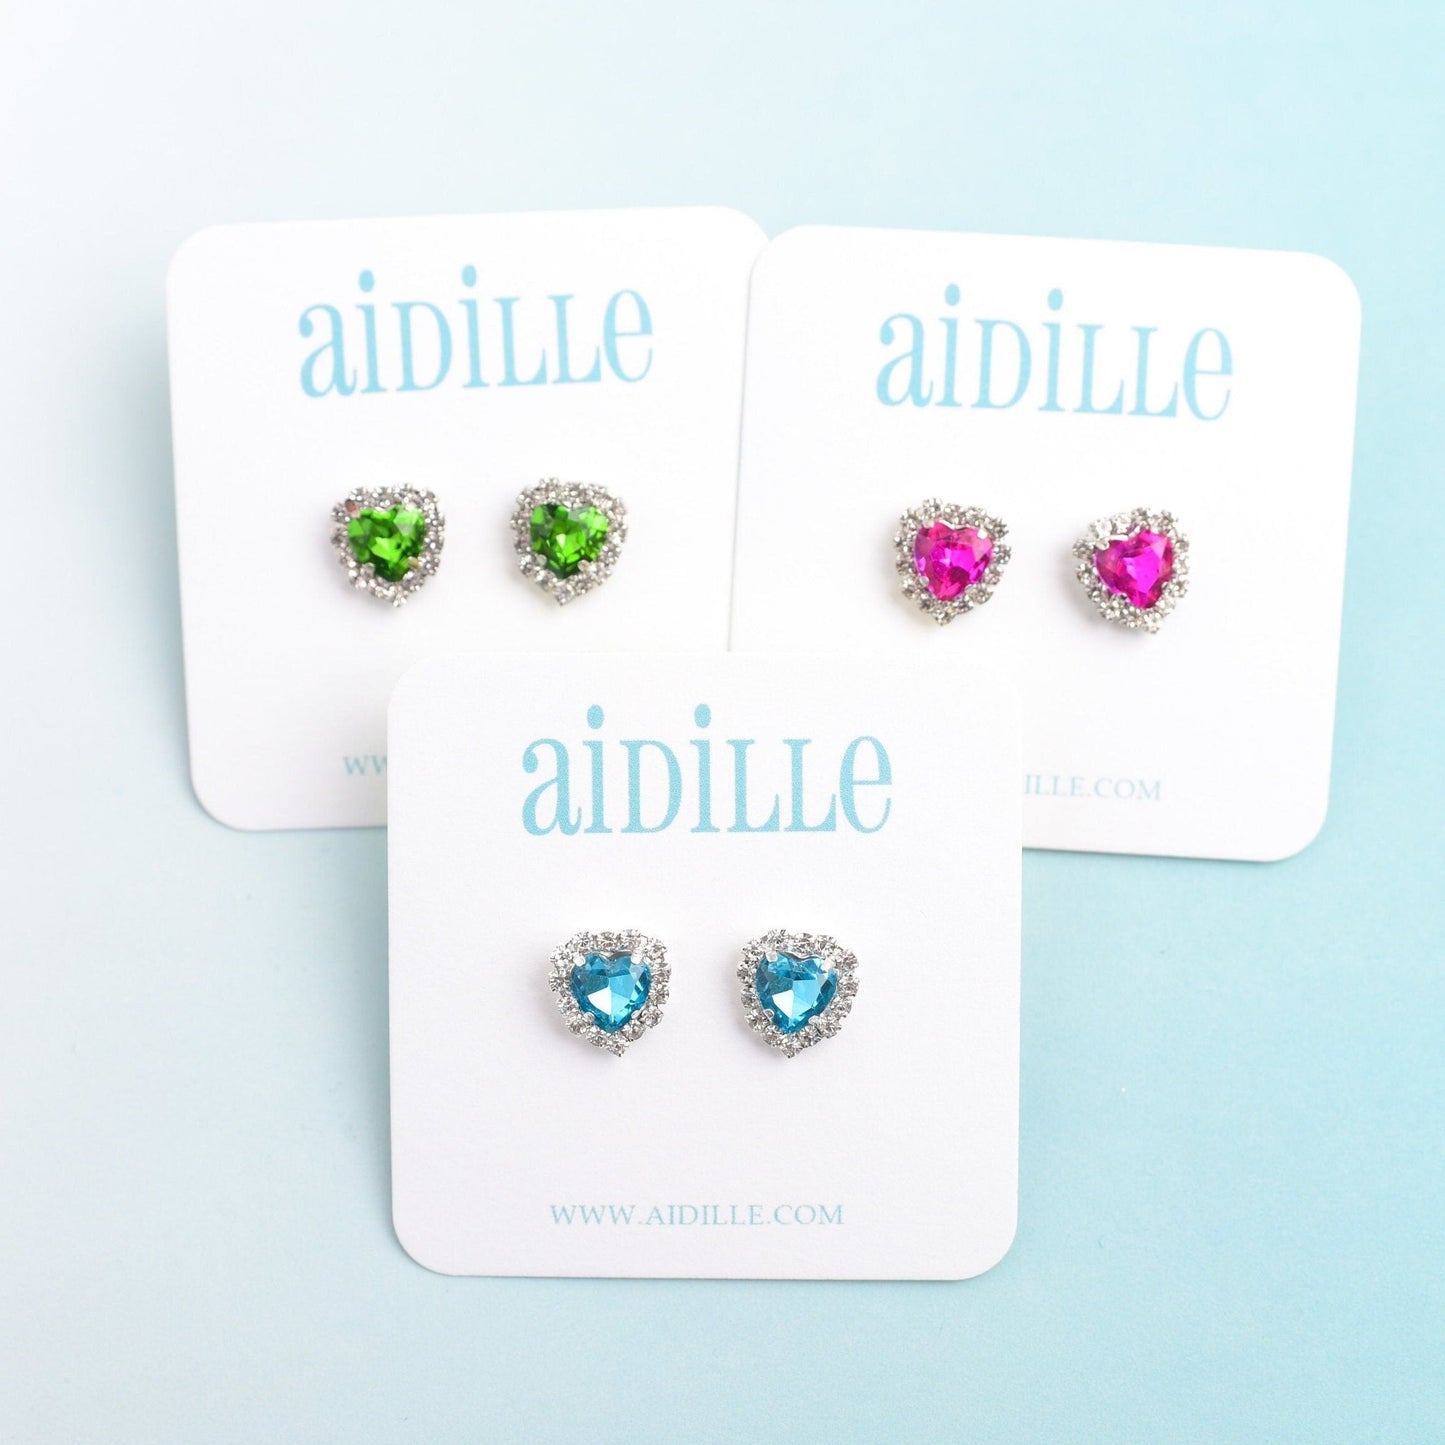 Sparkly Rhinestone Heart Earrings with Titanium Posts- Choose Pink Blue or Green